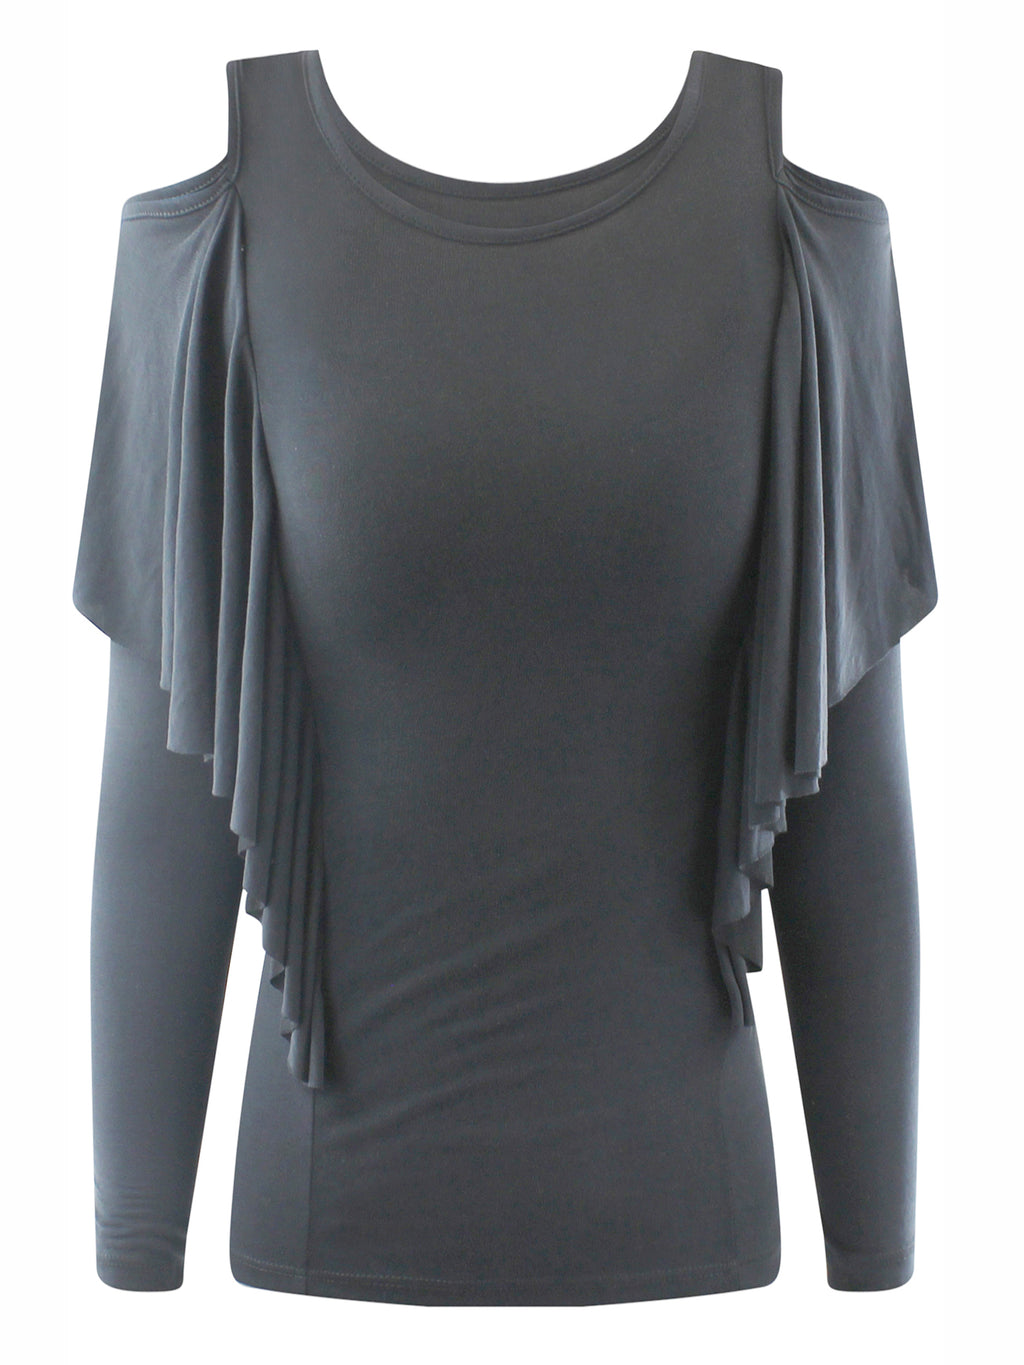 Charcoal Gray Cold Shoulder Sleeve Ruffled Top